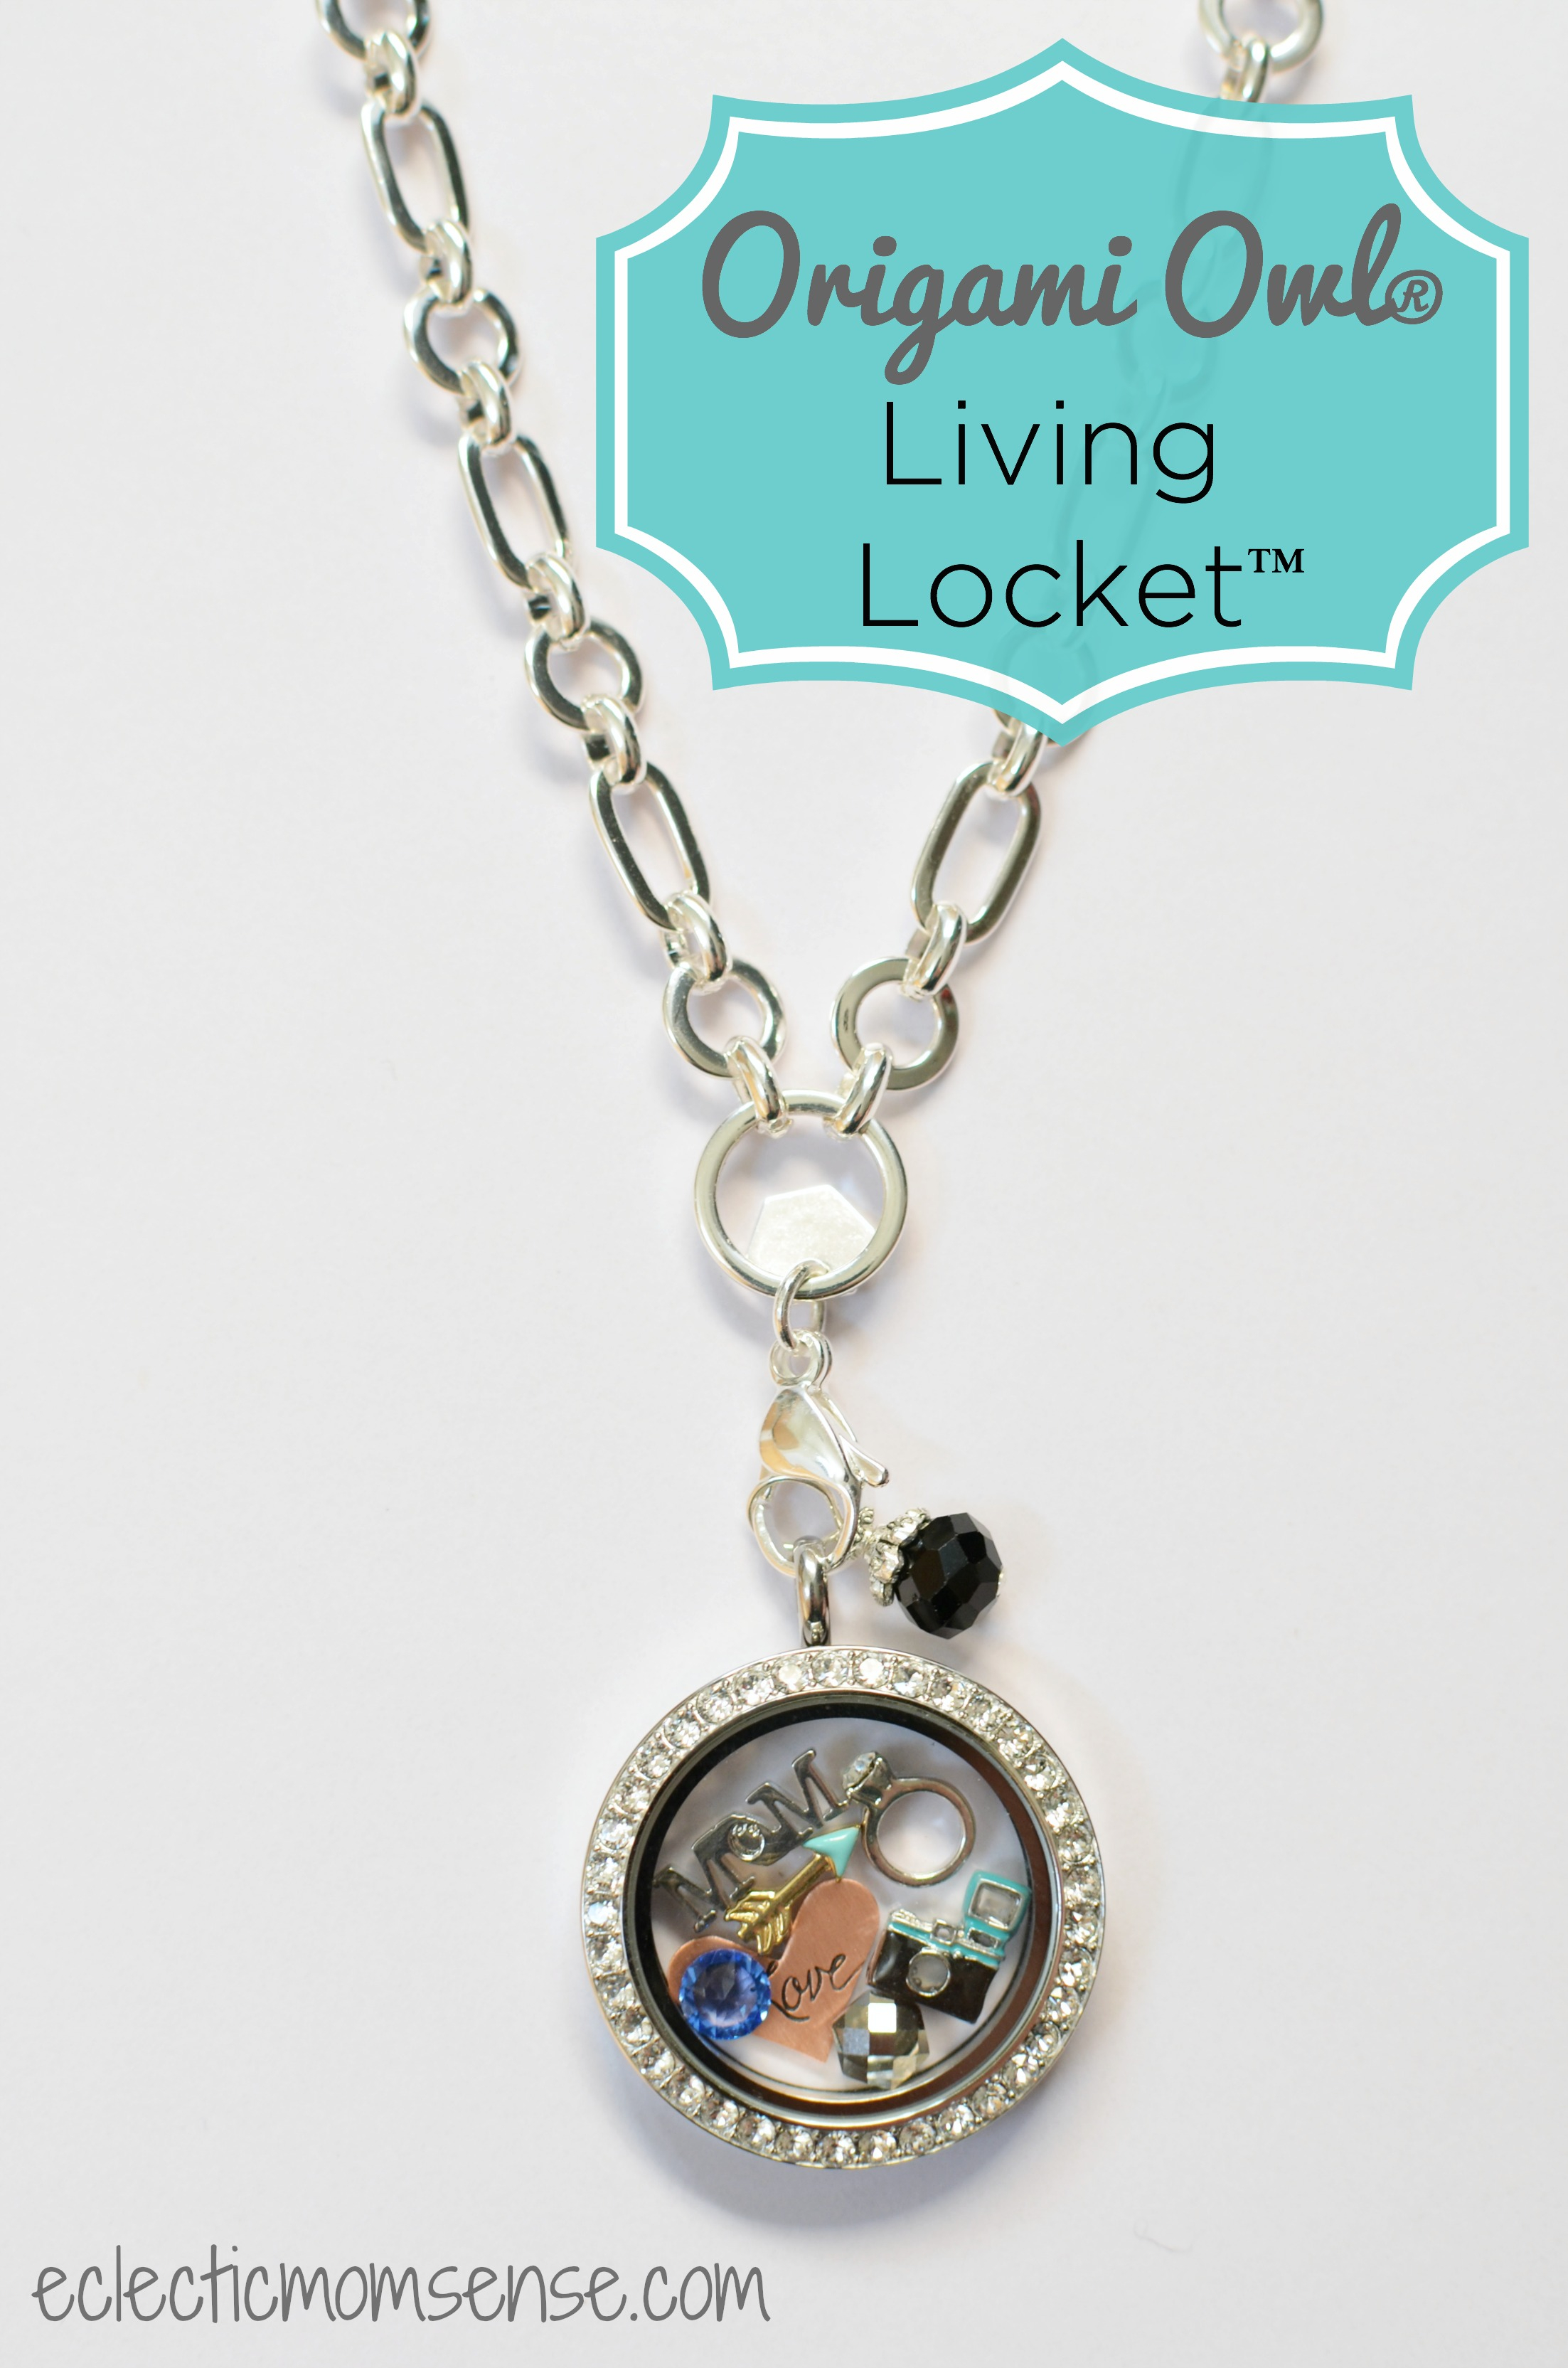 Origami Owl Coupon Origami Owl Living Locket Building Your Story Eclectic Momsense